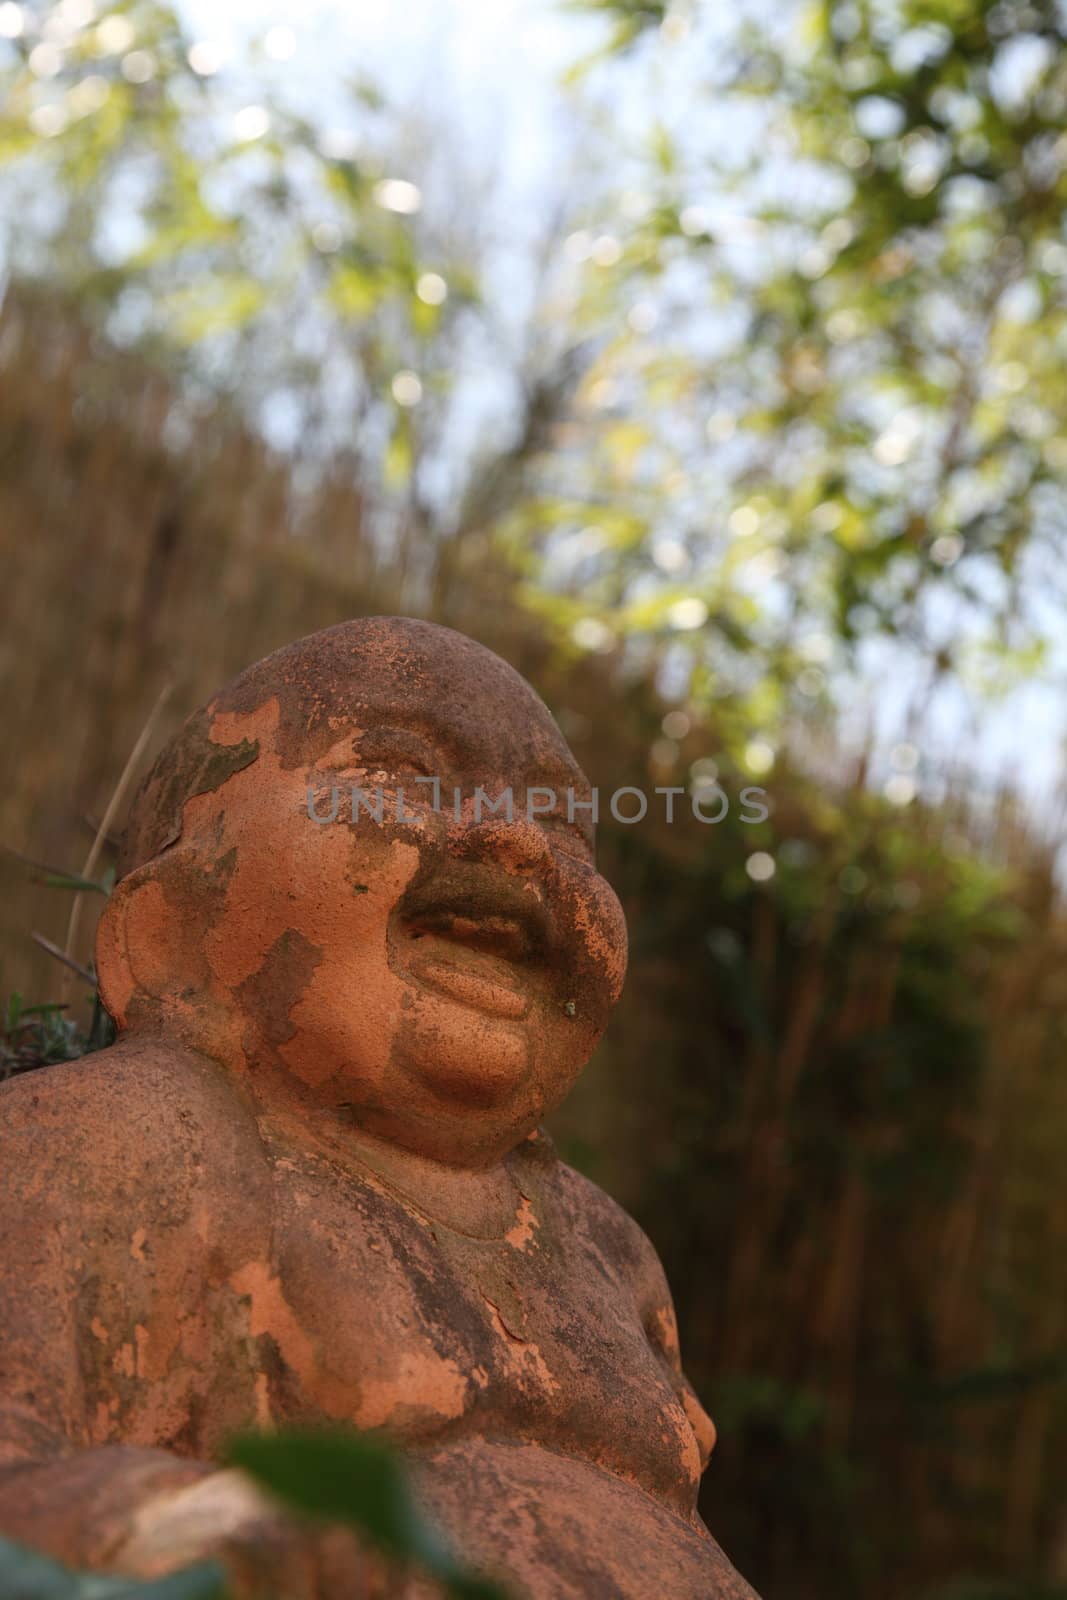 Low angle view of the face of a terracotta smiling Buddha statue outdoors looking up through greenery to blue sky